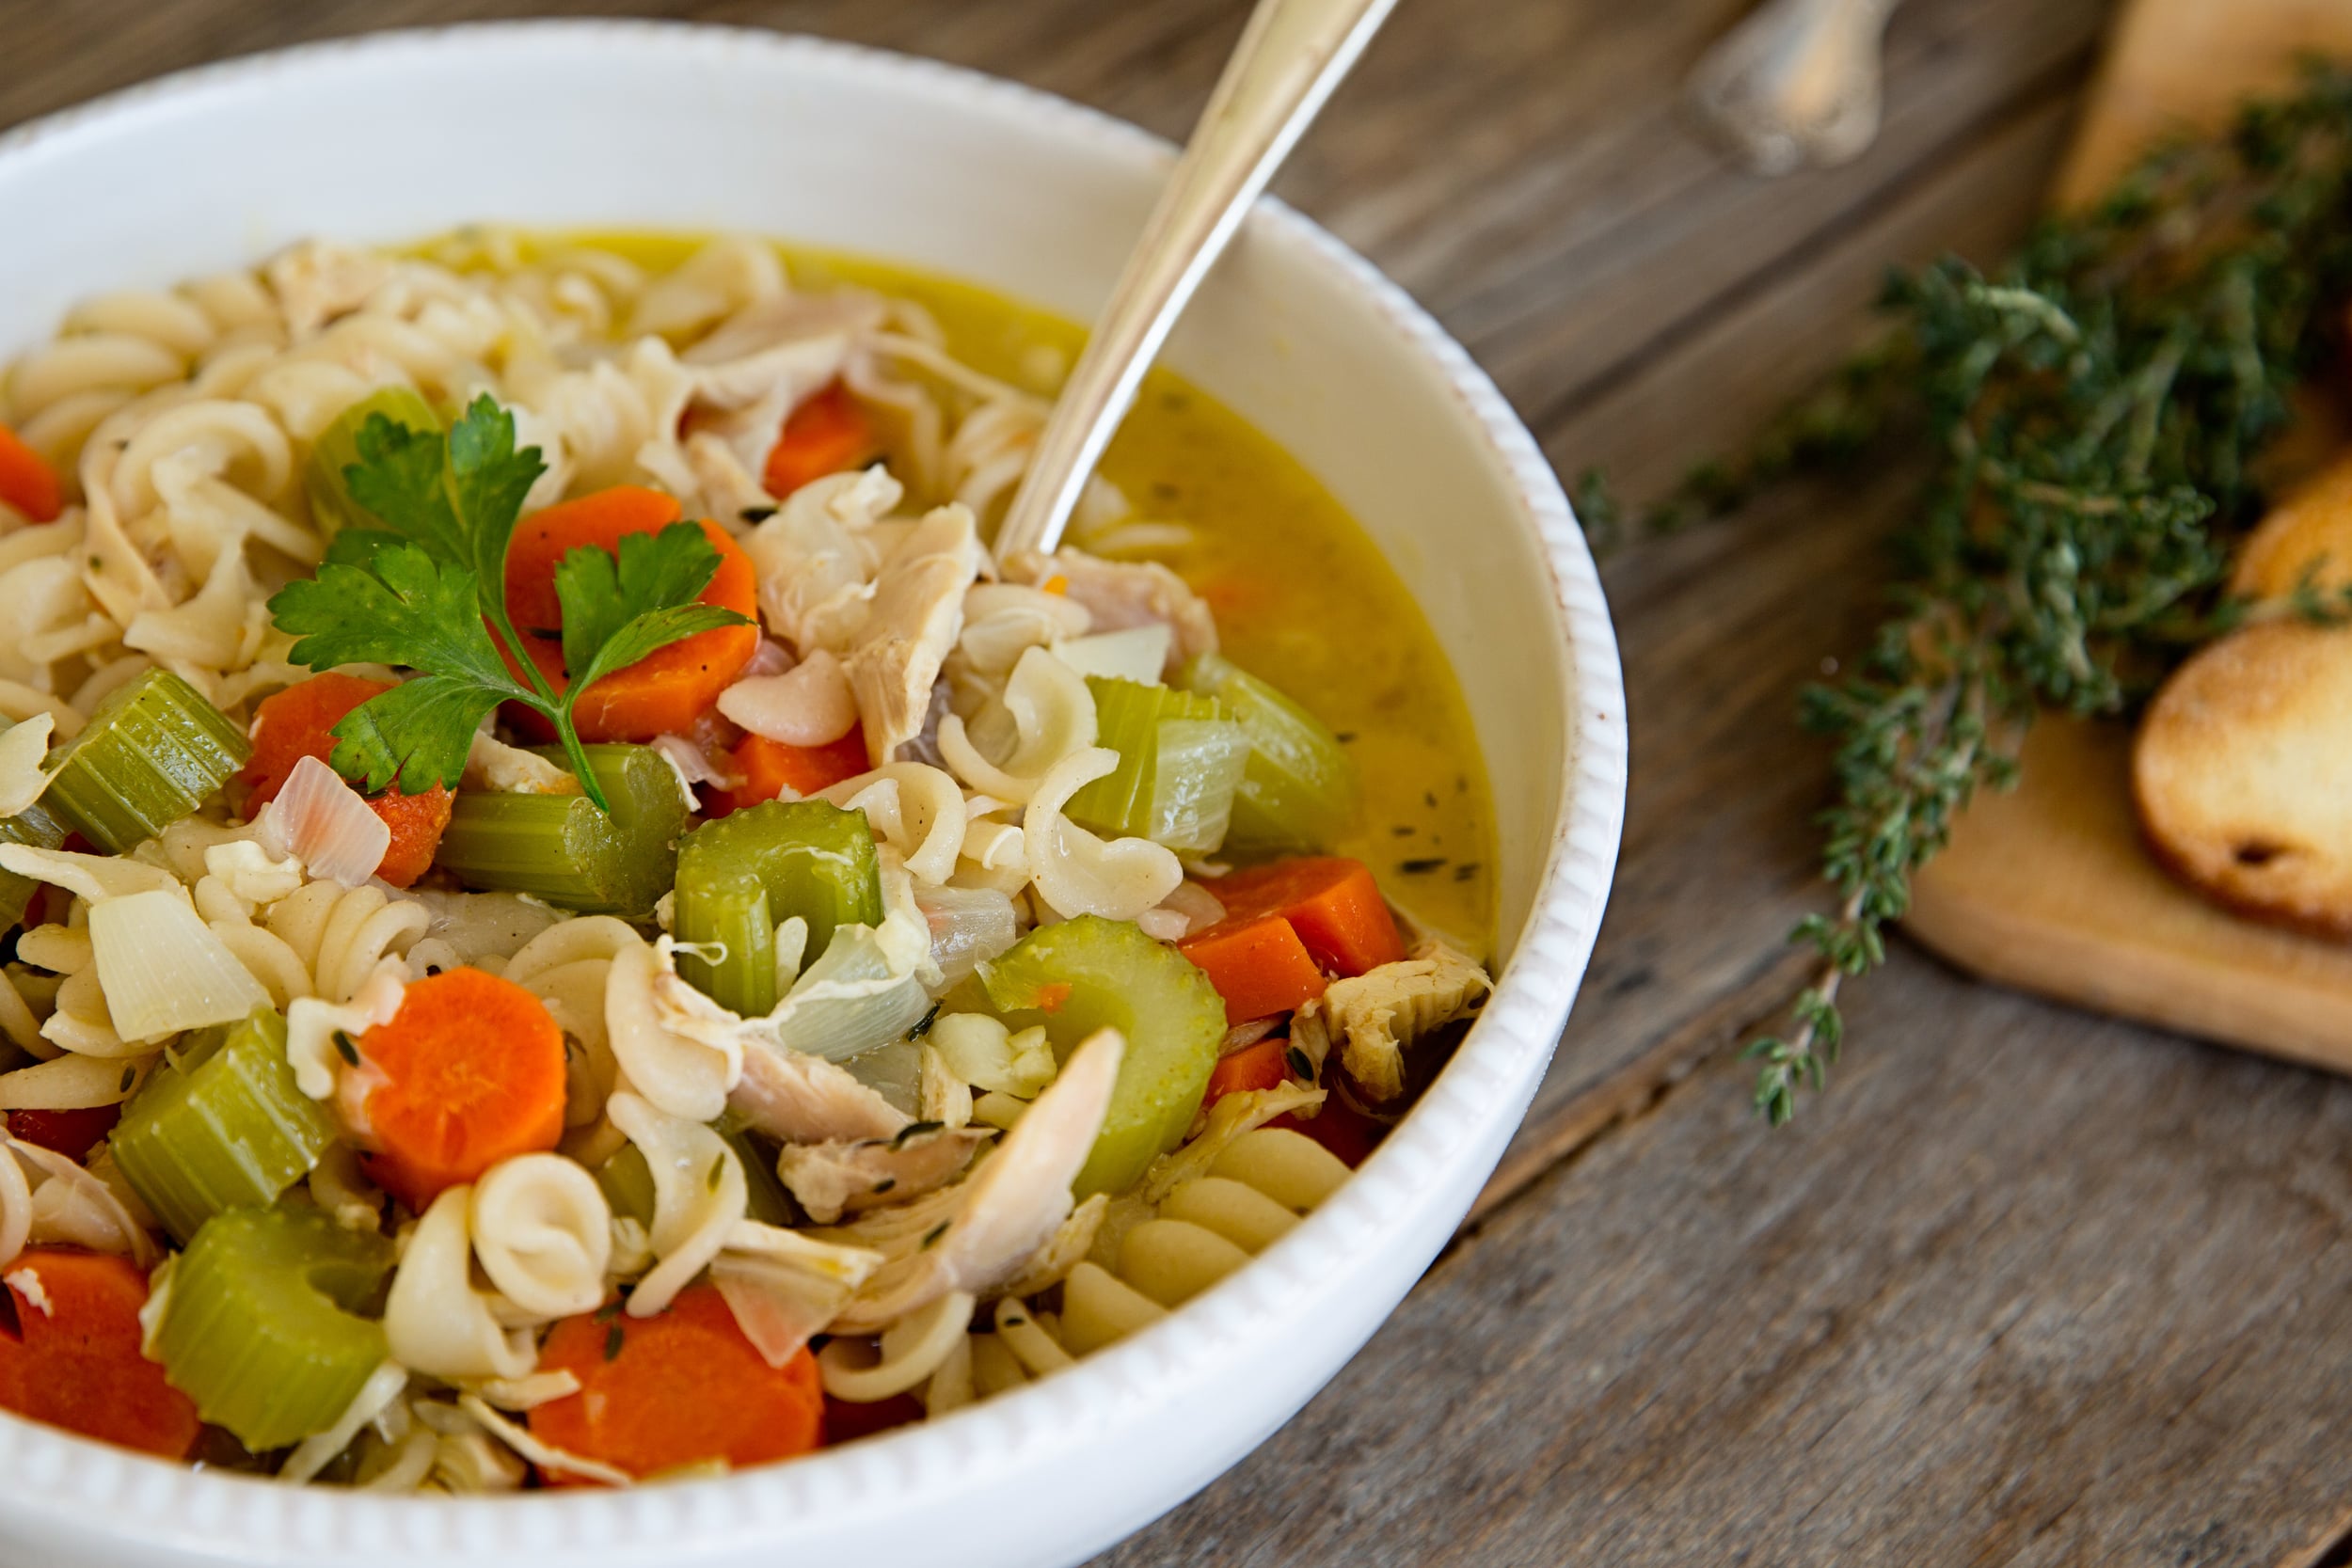 How to Make Chicken Noodle Soup From Scratch, Chicken Noodle Soup Recipe, Tyler Florence